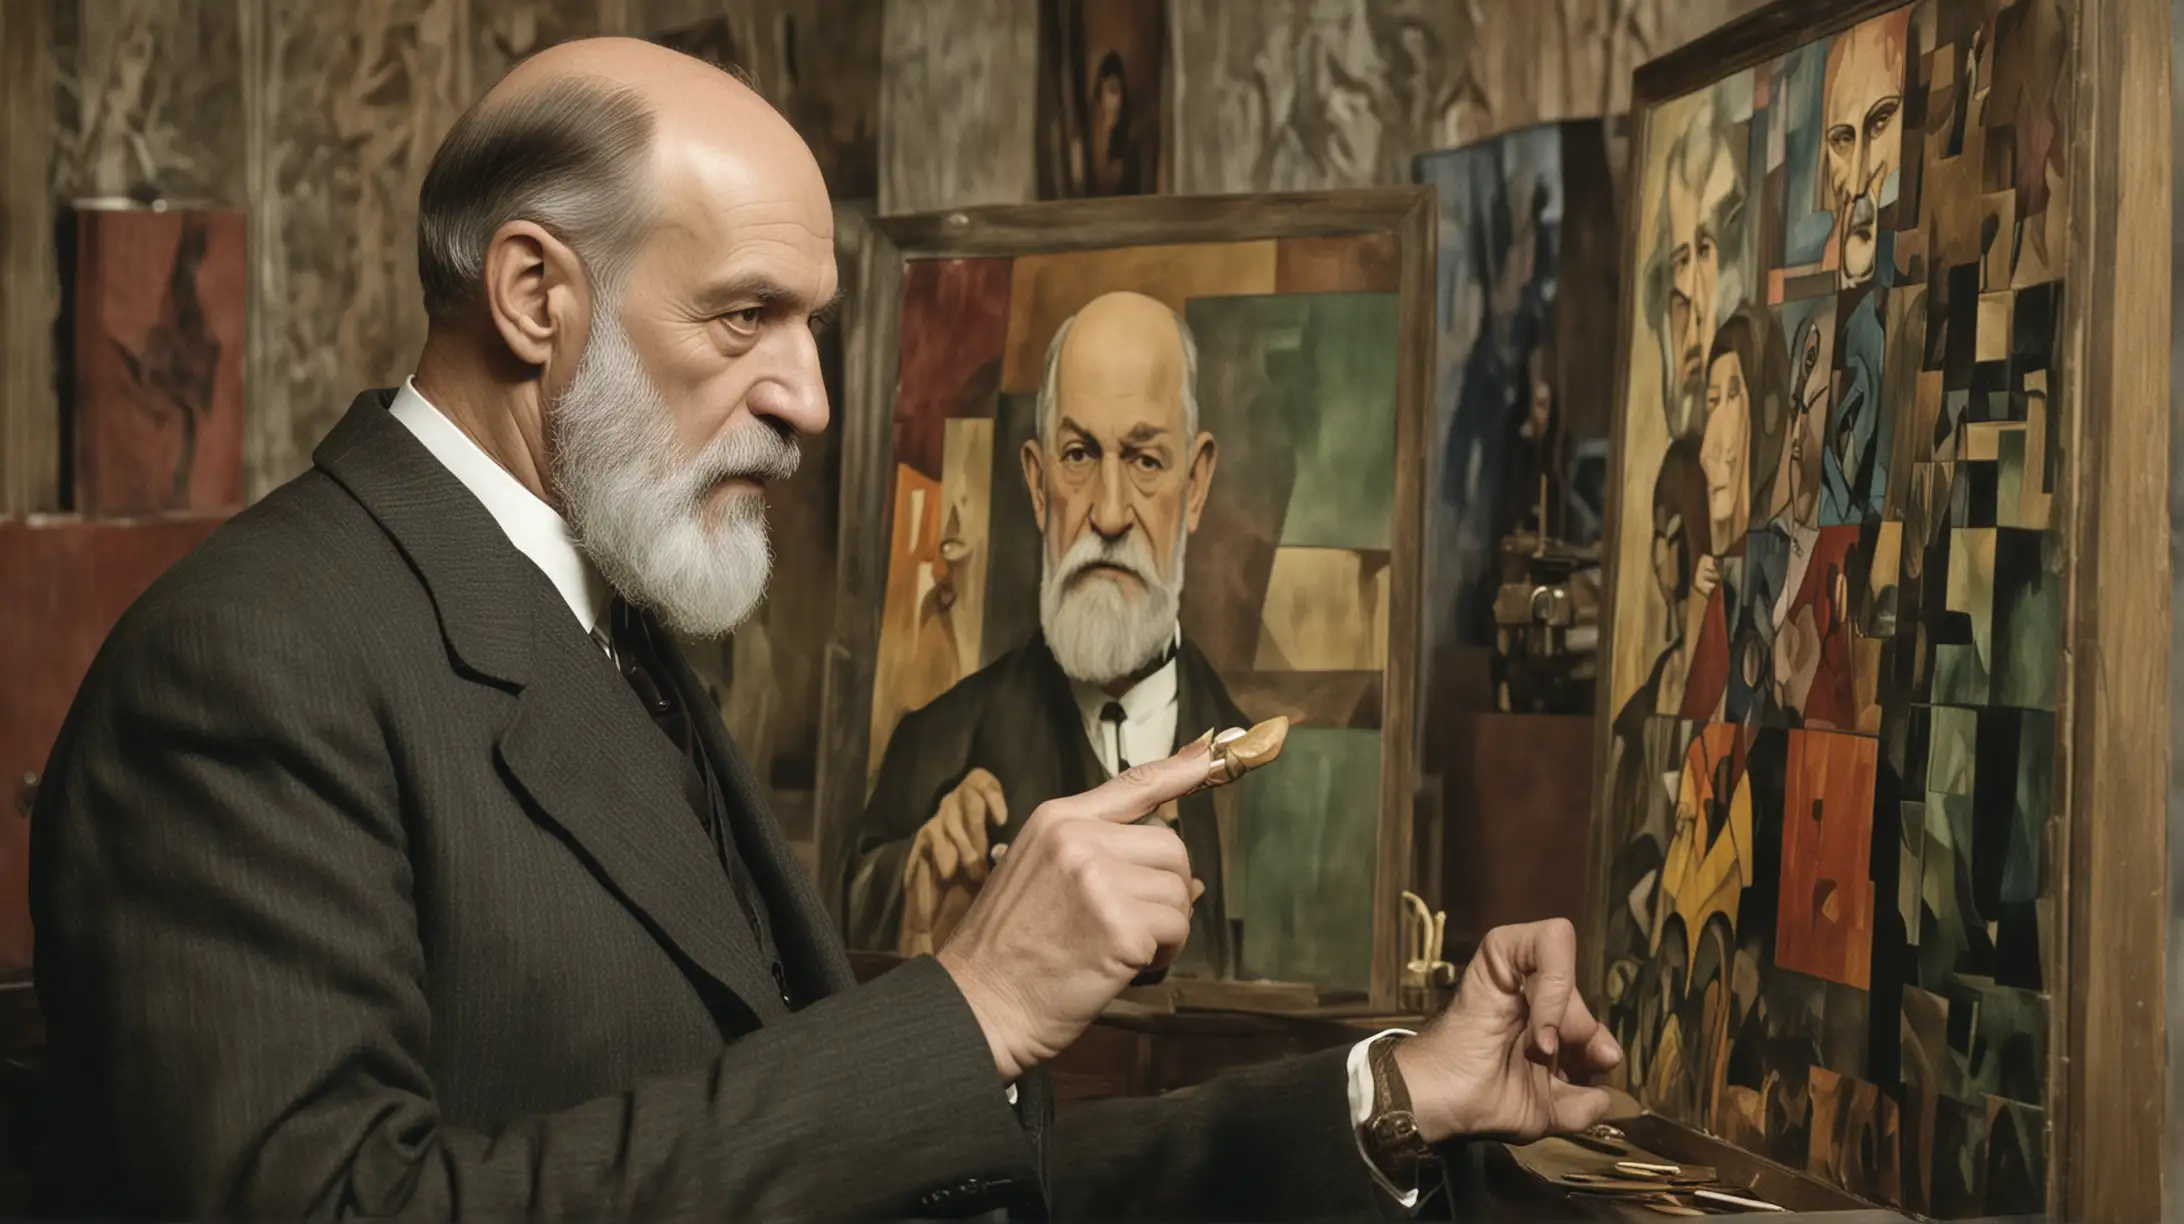 Year 1917. Sigmund Freud rSigmund Freud looks at a painting cubist. Styled like an old hand-colored silent film.